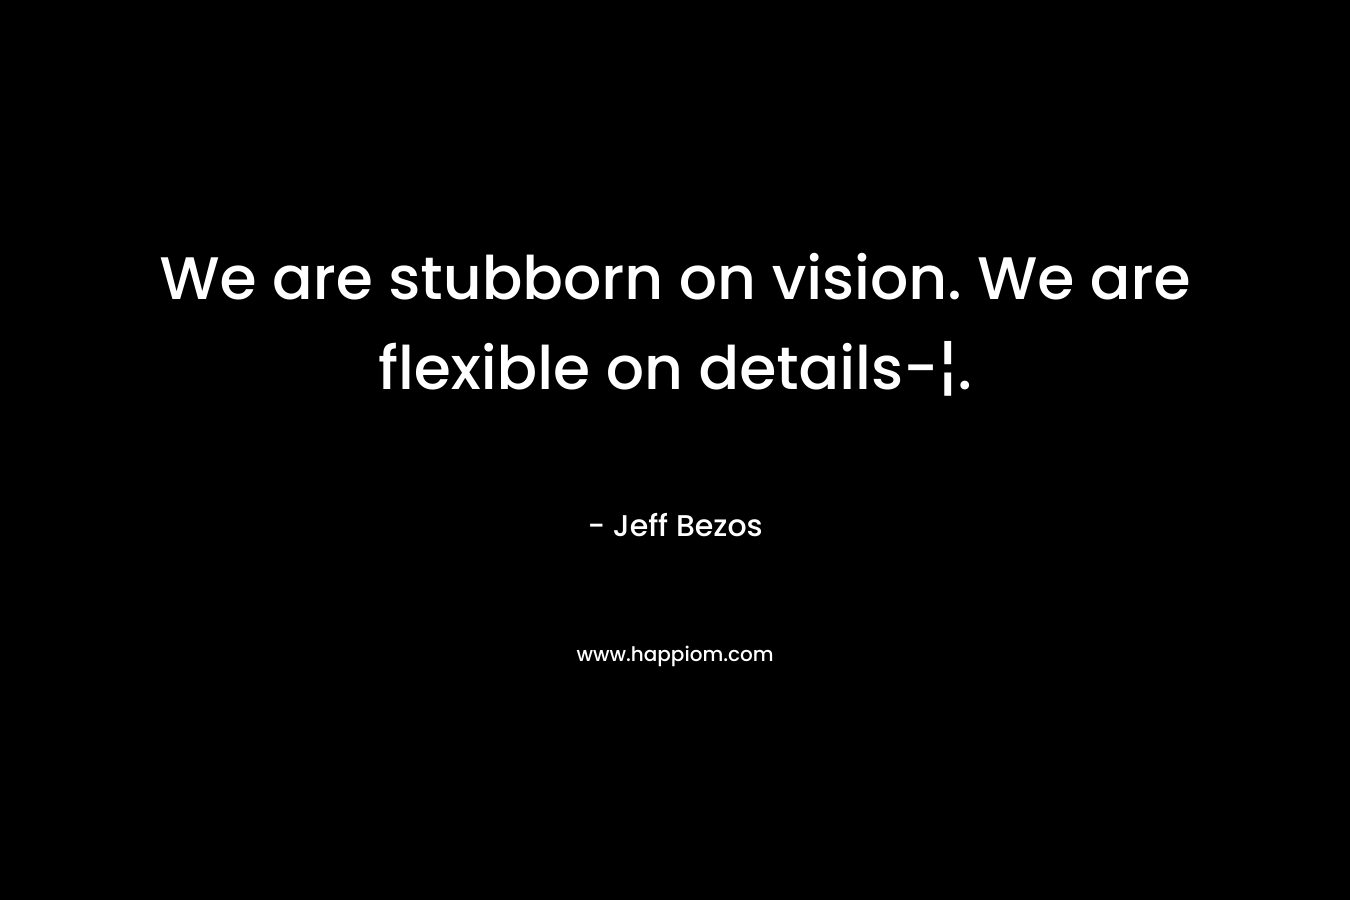 We are stubborn on vision. We are flexible on details-¦. – Jeff Bezos